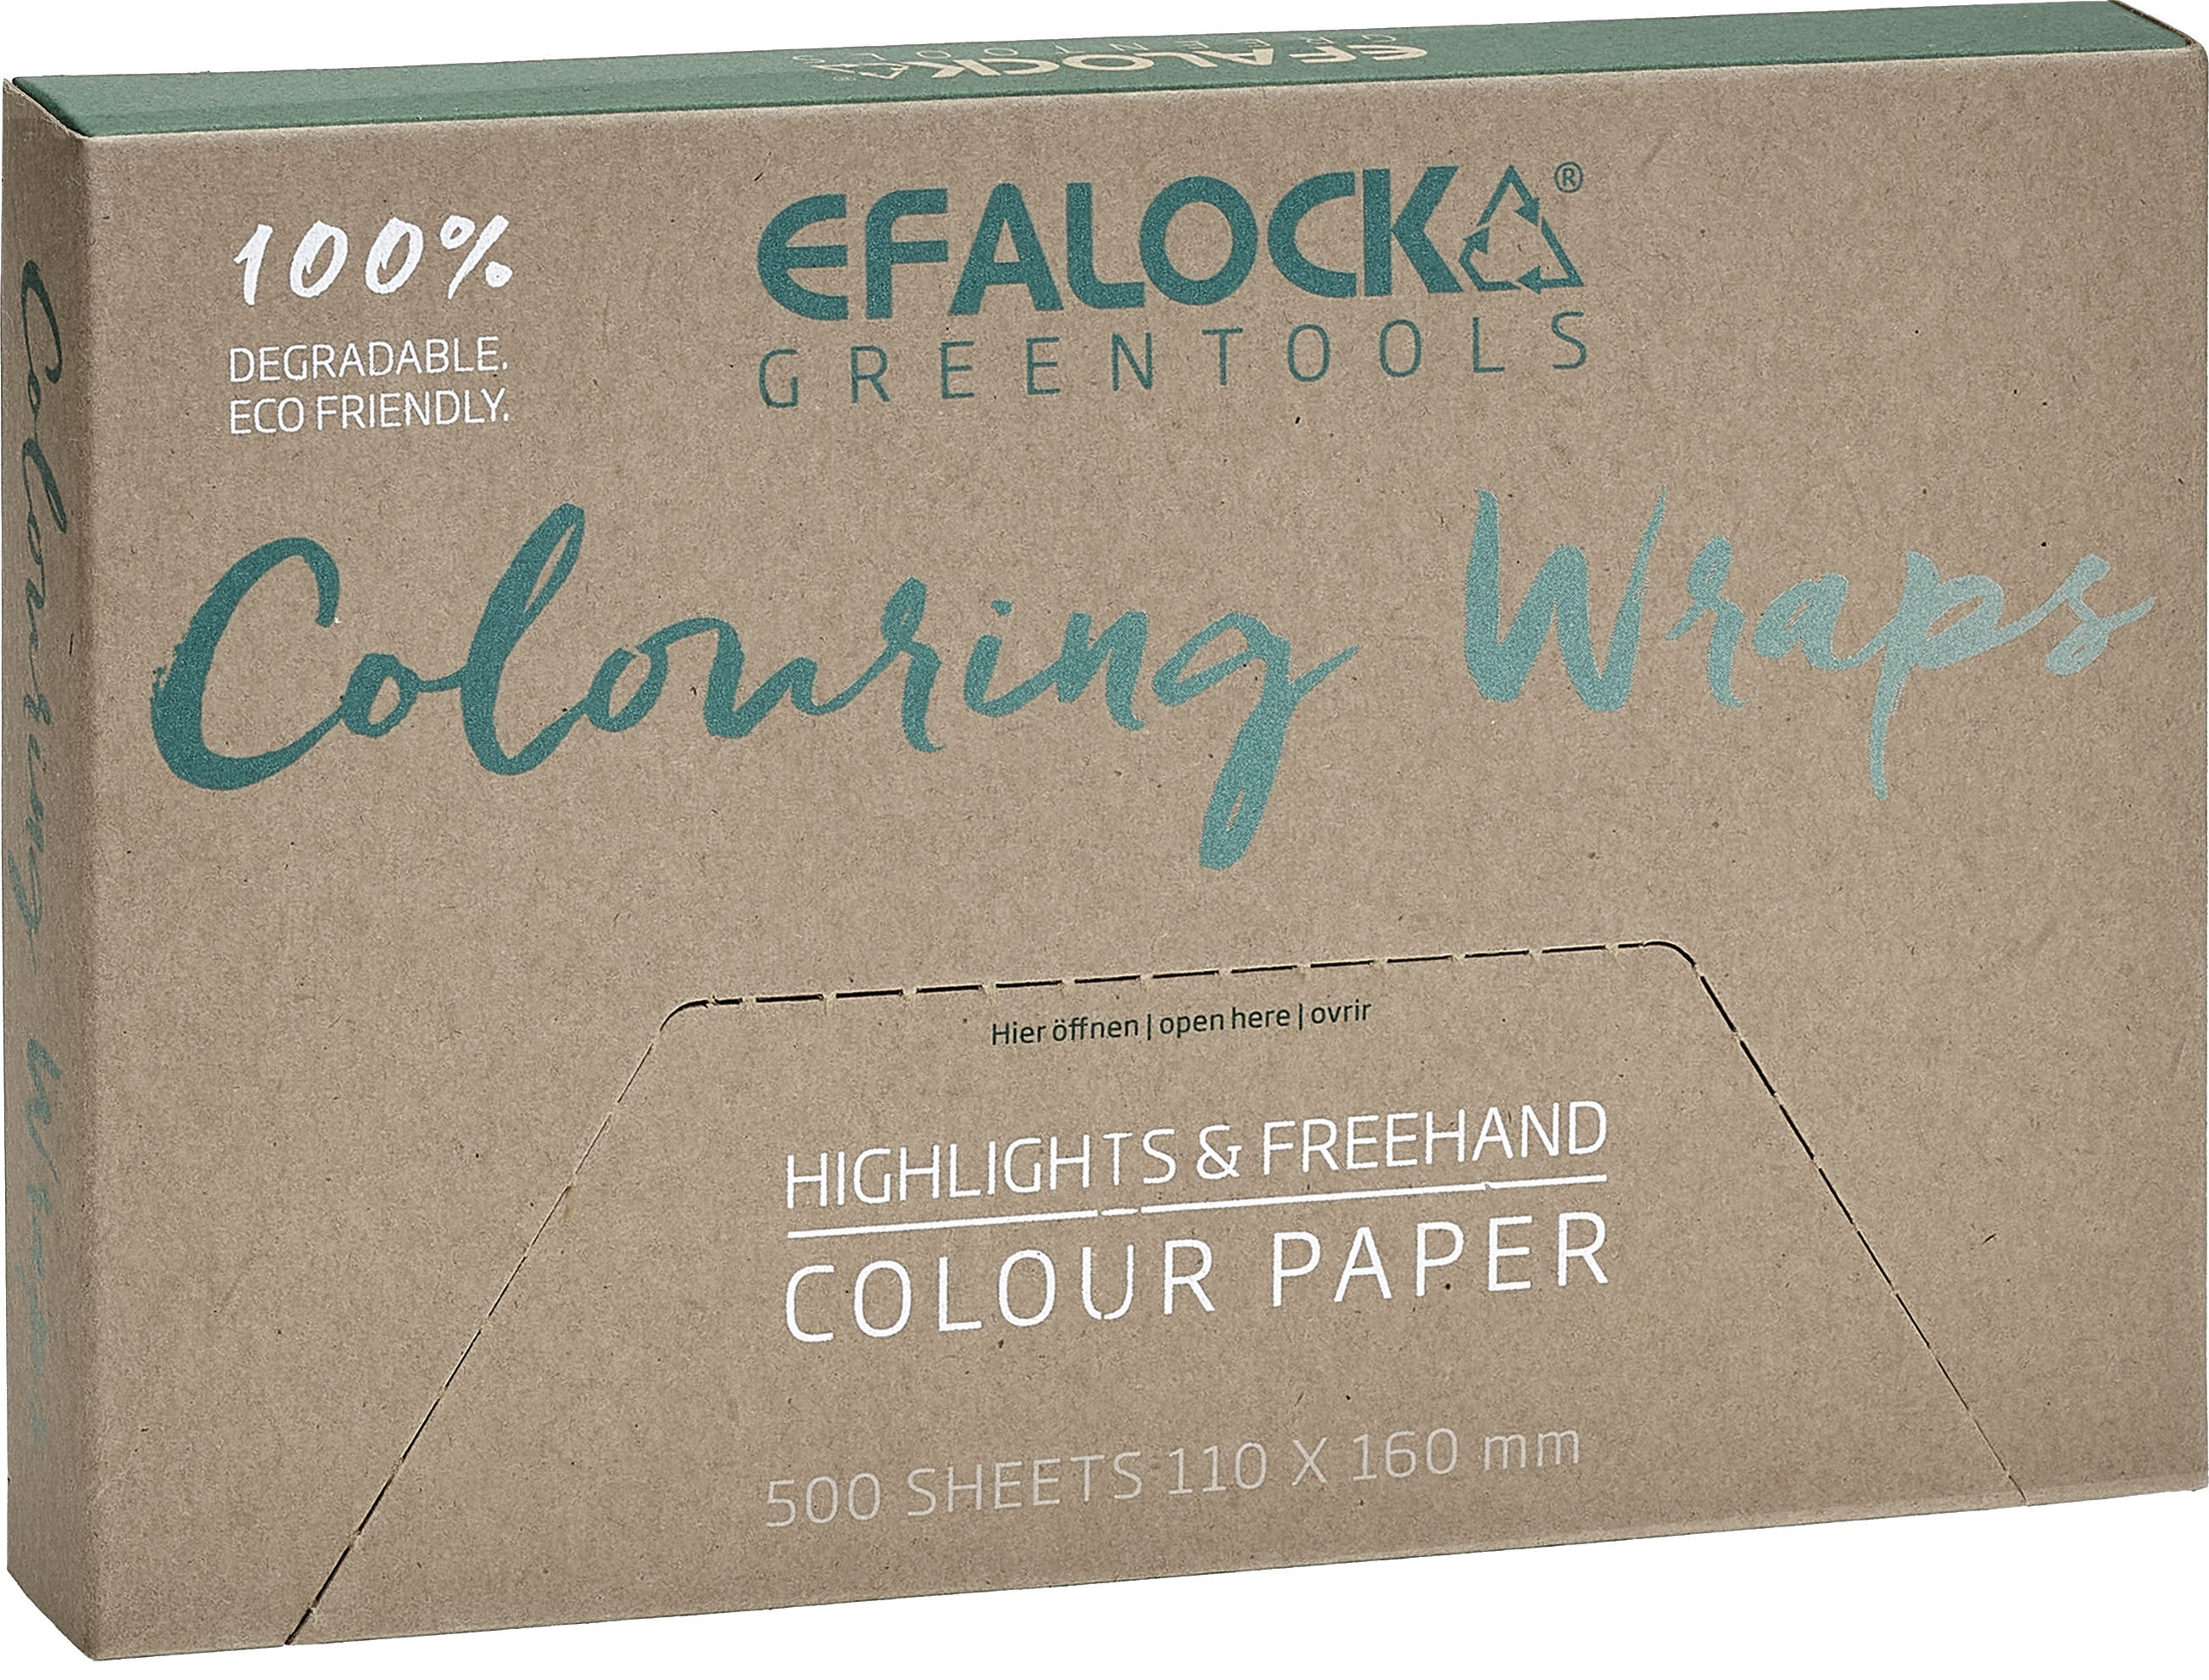 PAPERGREEN COLORING WRAPS highlight strips